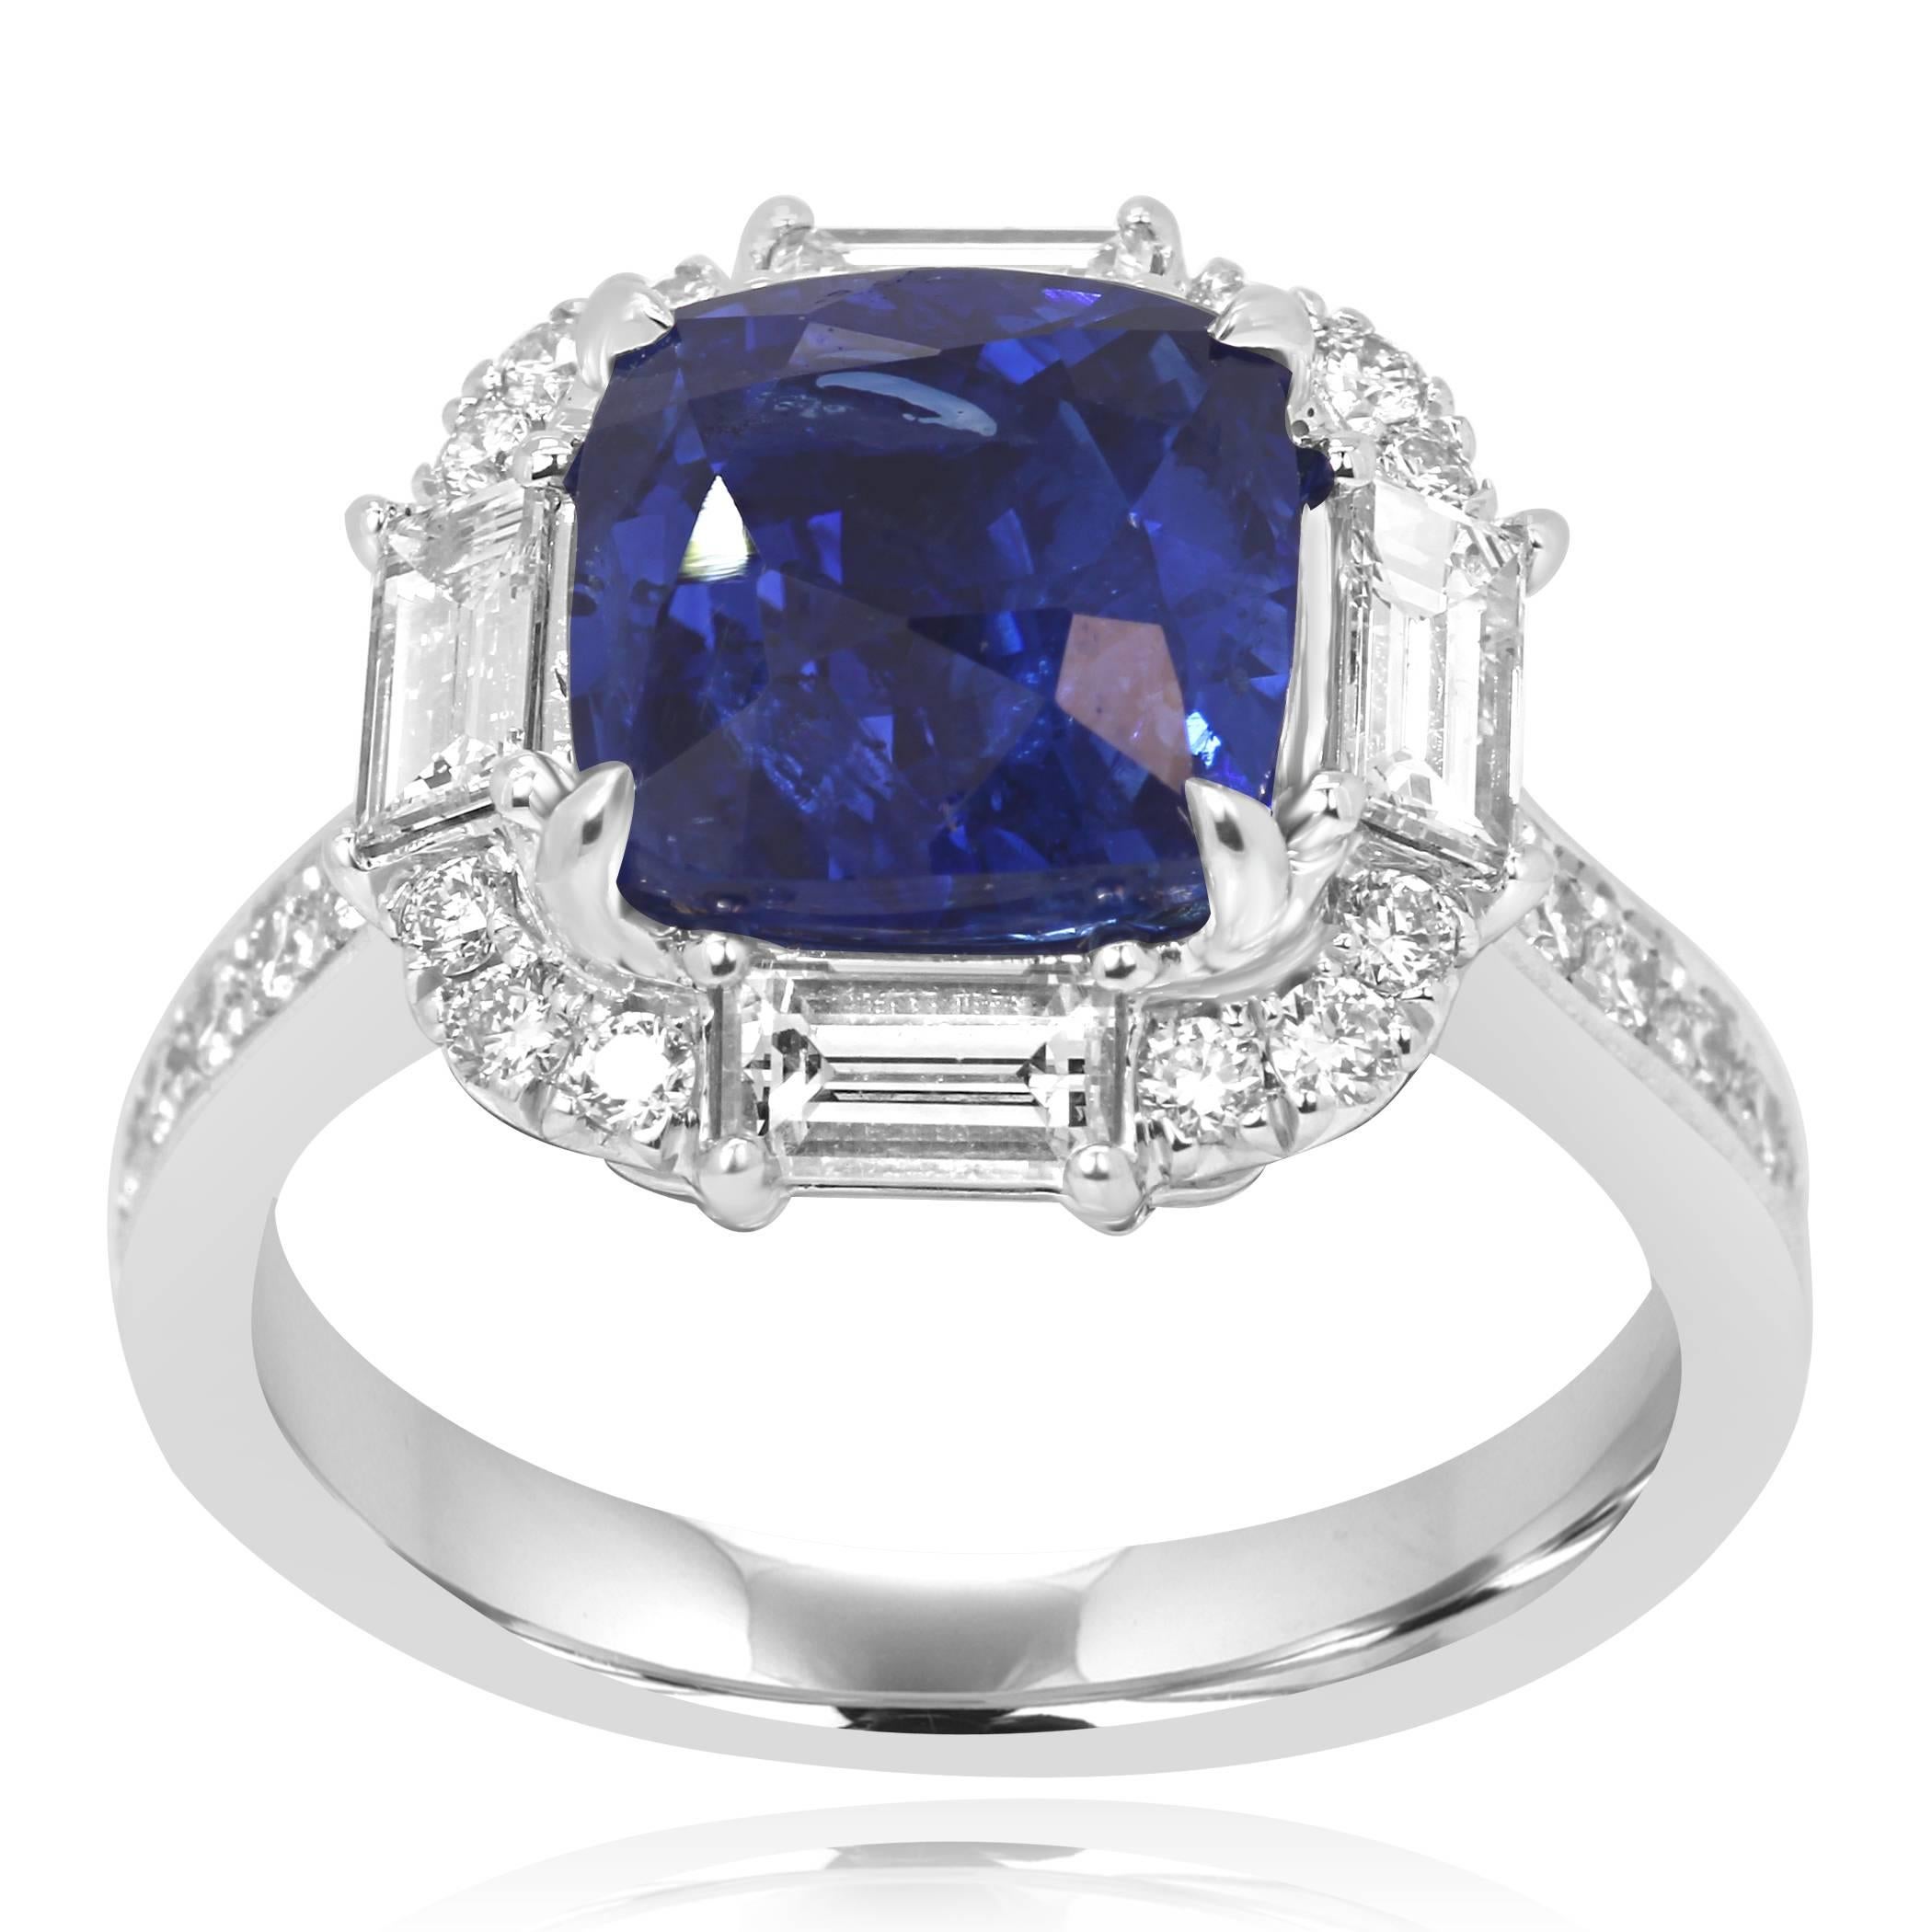 Stunning GIA Certified Ceylon Blue Sapphire Cushion 4.10 Carat encircled in a Halo of Round 0.50 Carat and Baguette Diamonds  0.73 Carat in 18K White Gold Ring.

Style available in different price ranges. Prices are based on your selection of 4C's